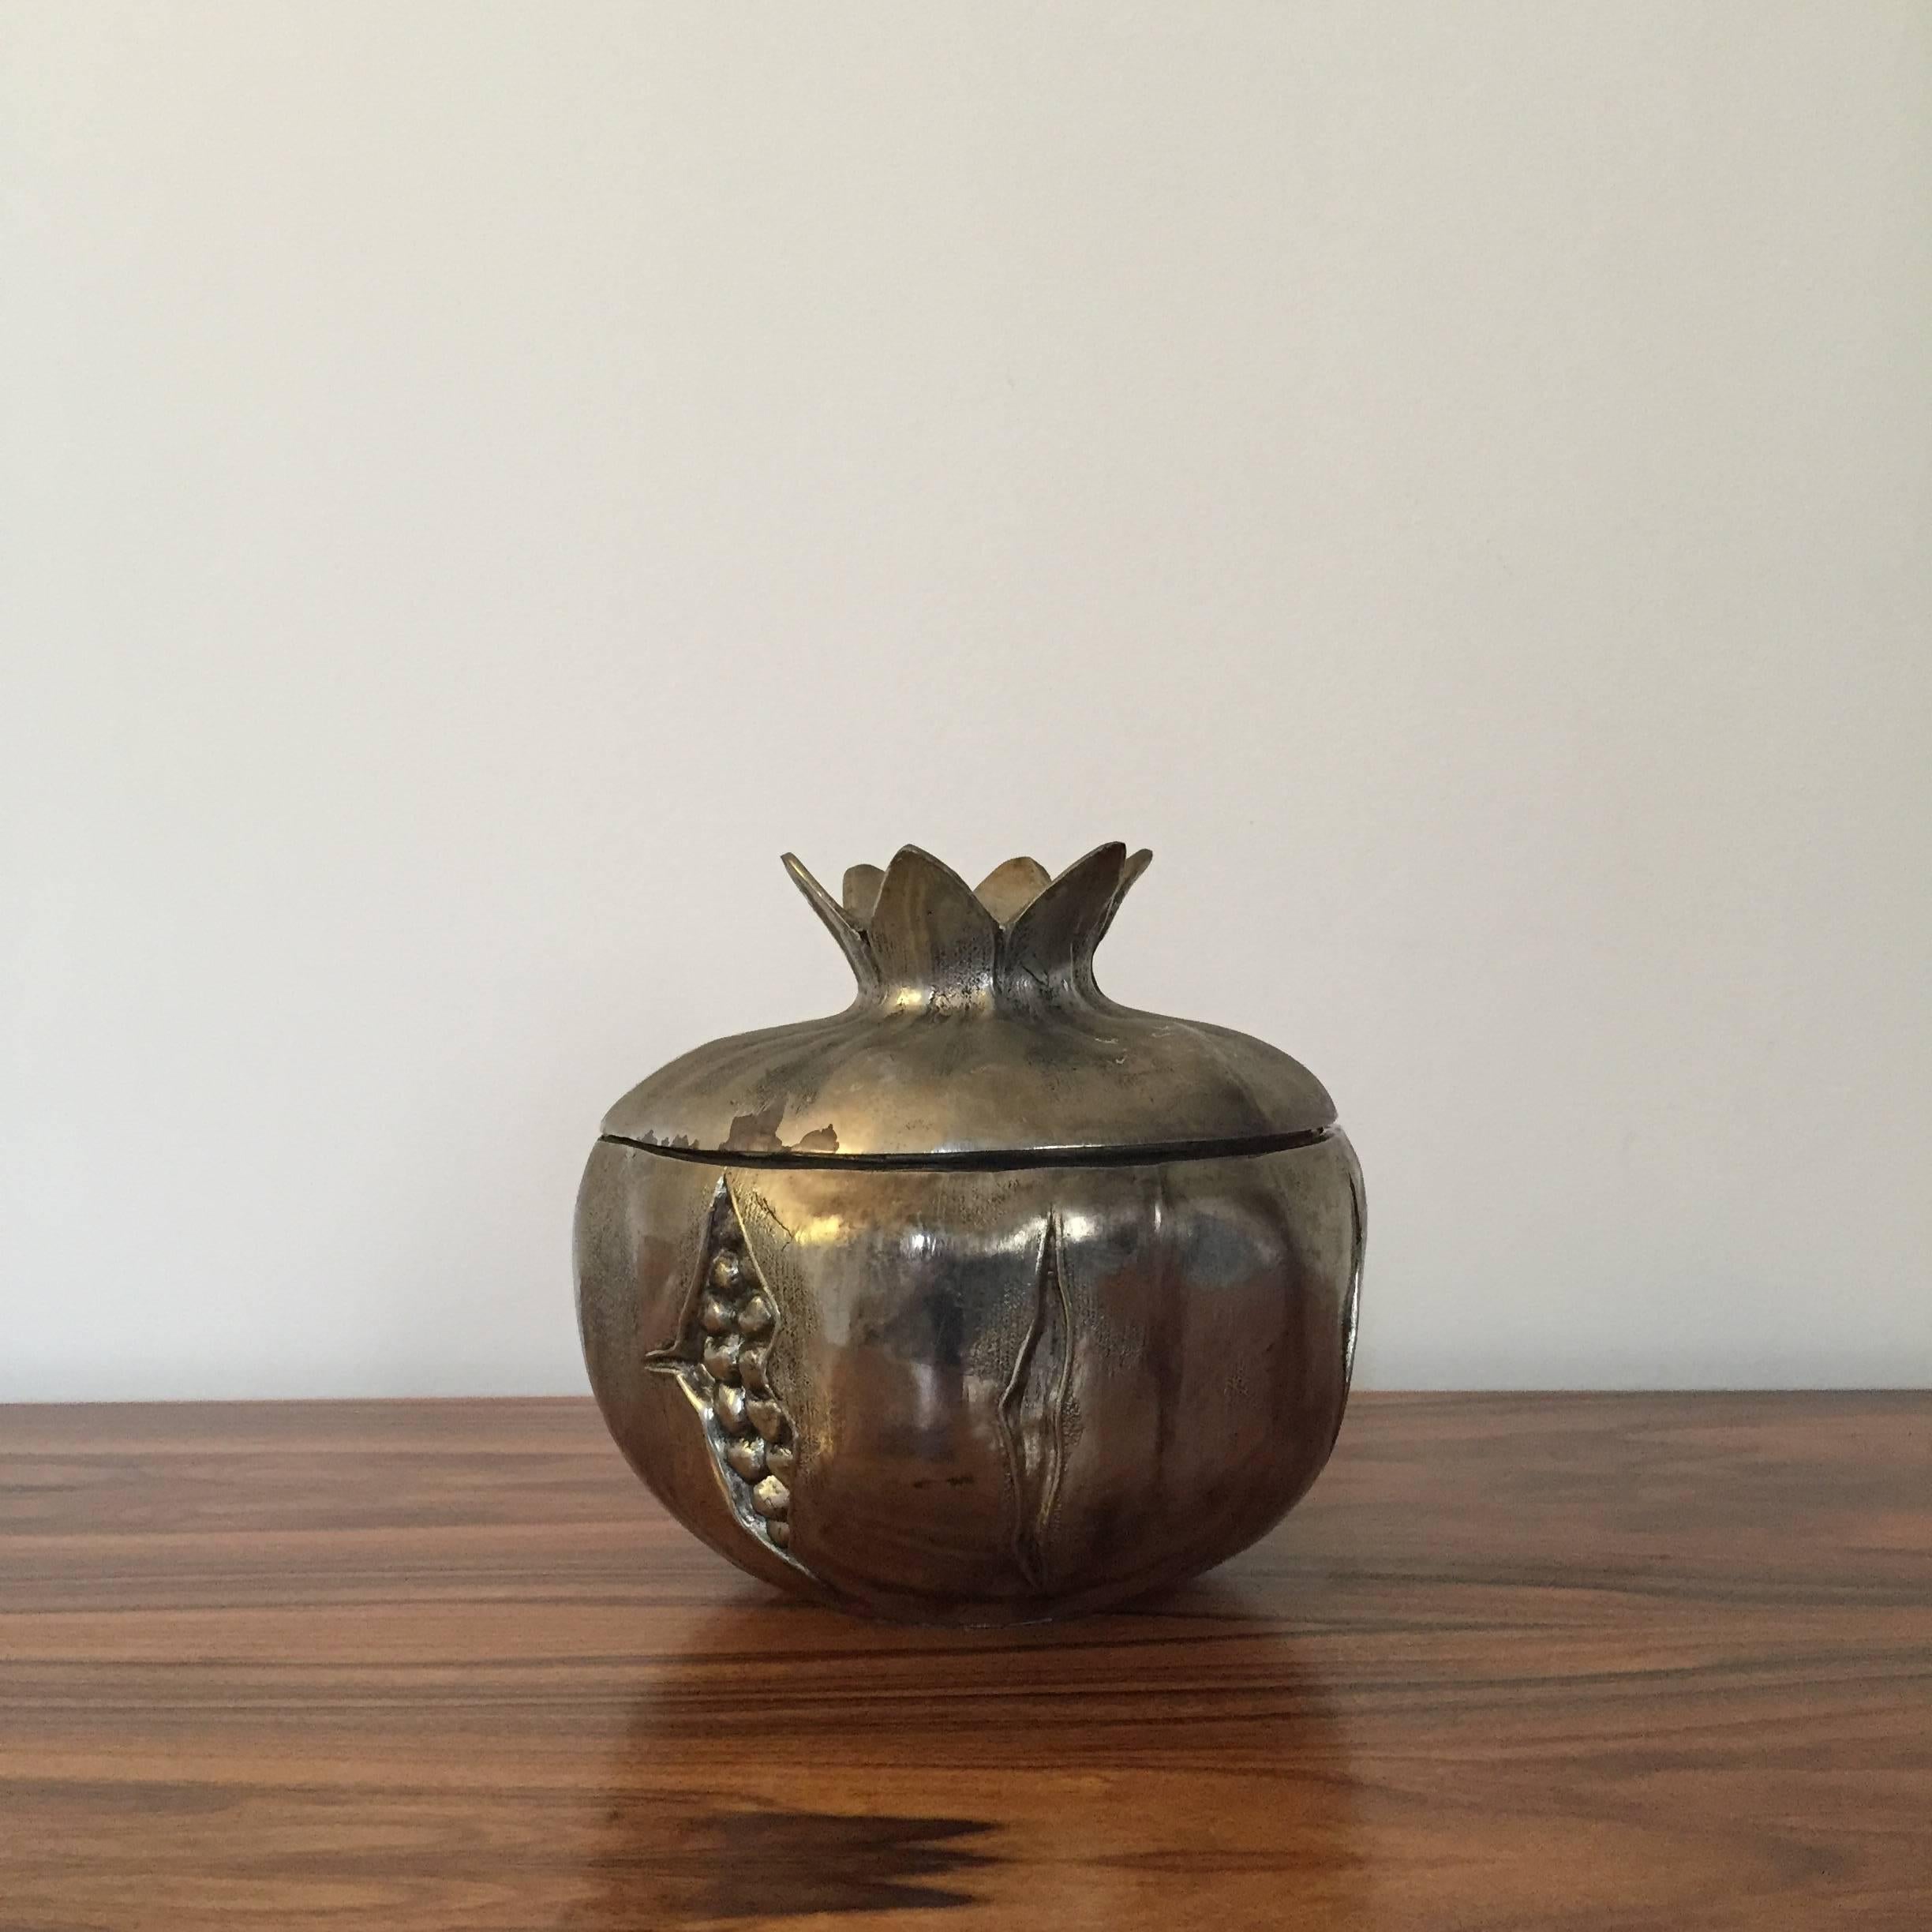 Beautiful pomegranate ice bucket by Mauro Manetti.
Silvered metal, Italy, 1950.
Stamp on the reverse: M. M., fond. d'arte Firenze, Made in Italy.